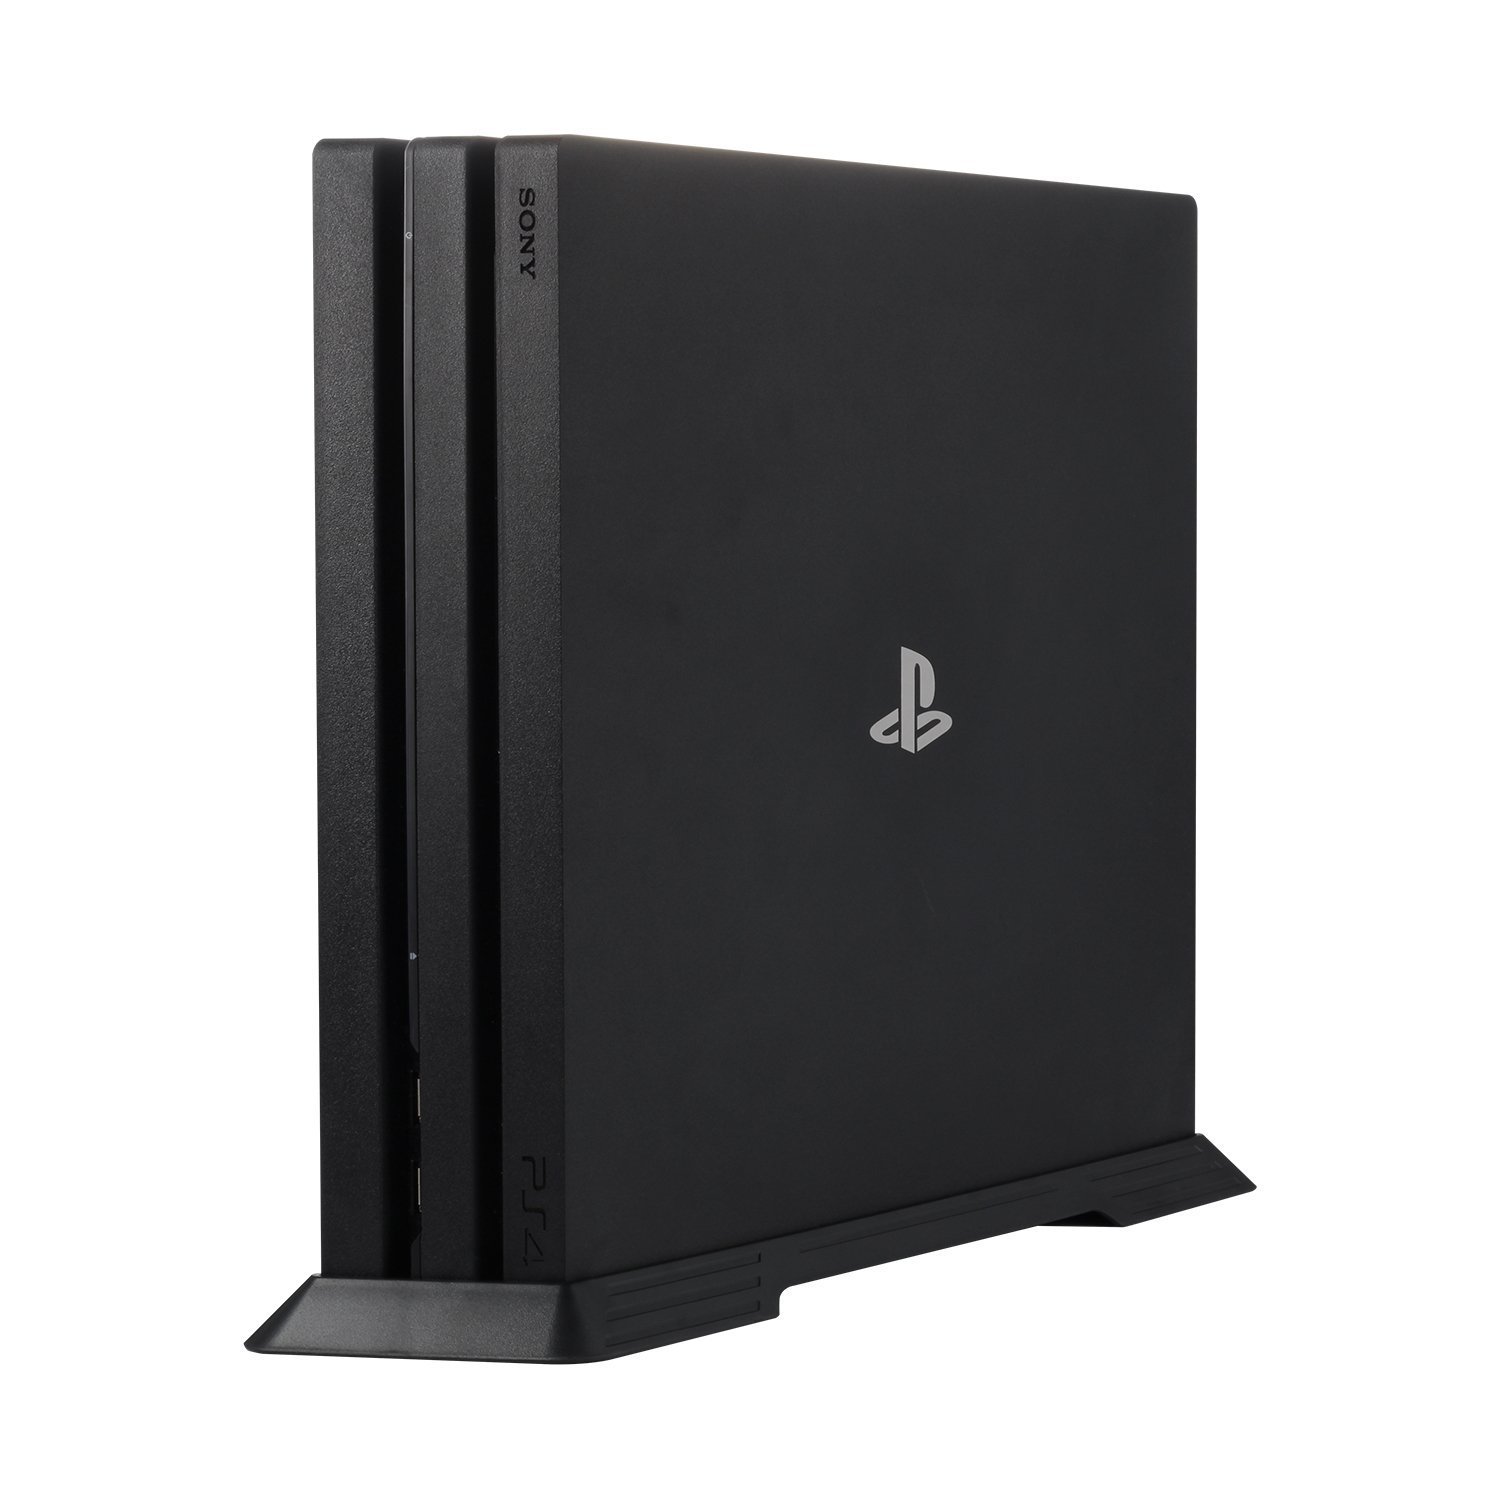 Younik basic PS4 vertical stand